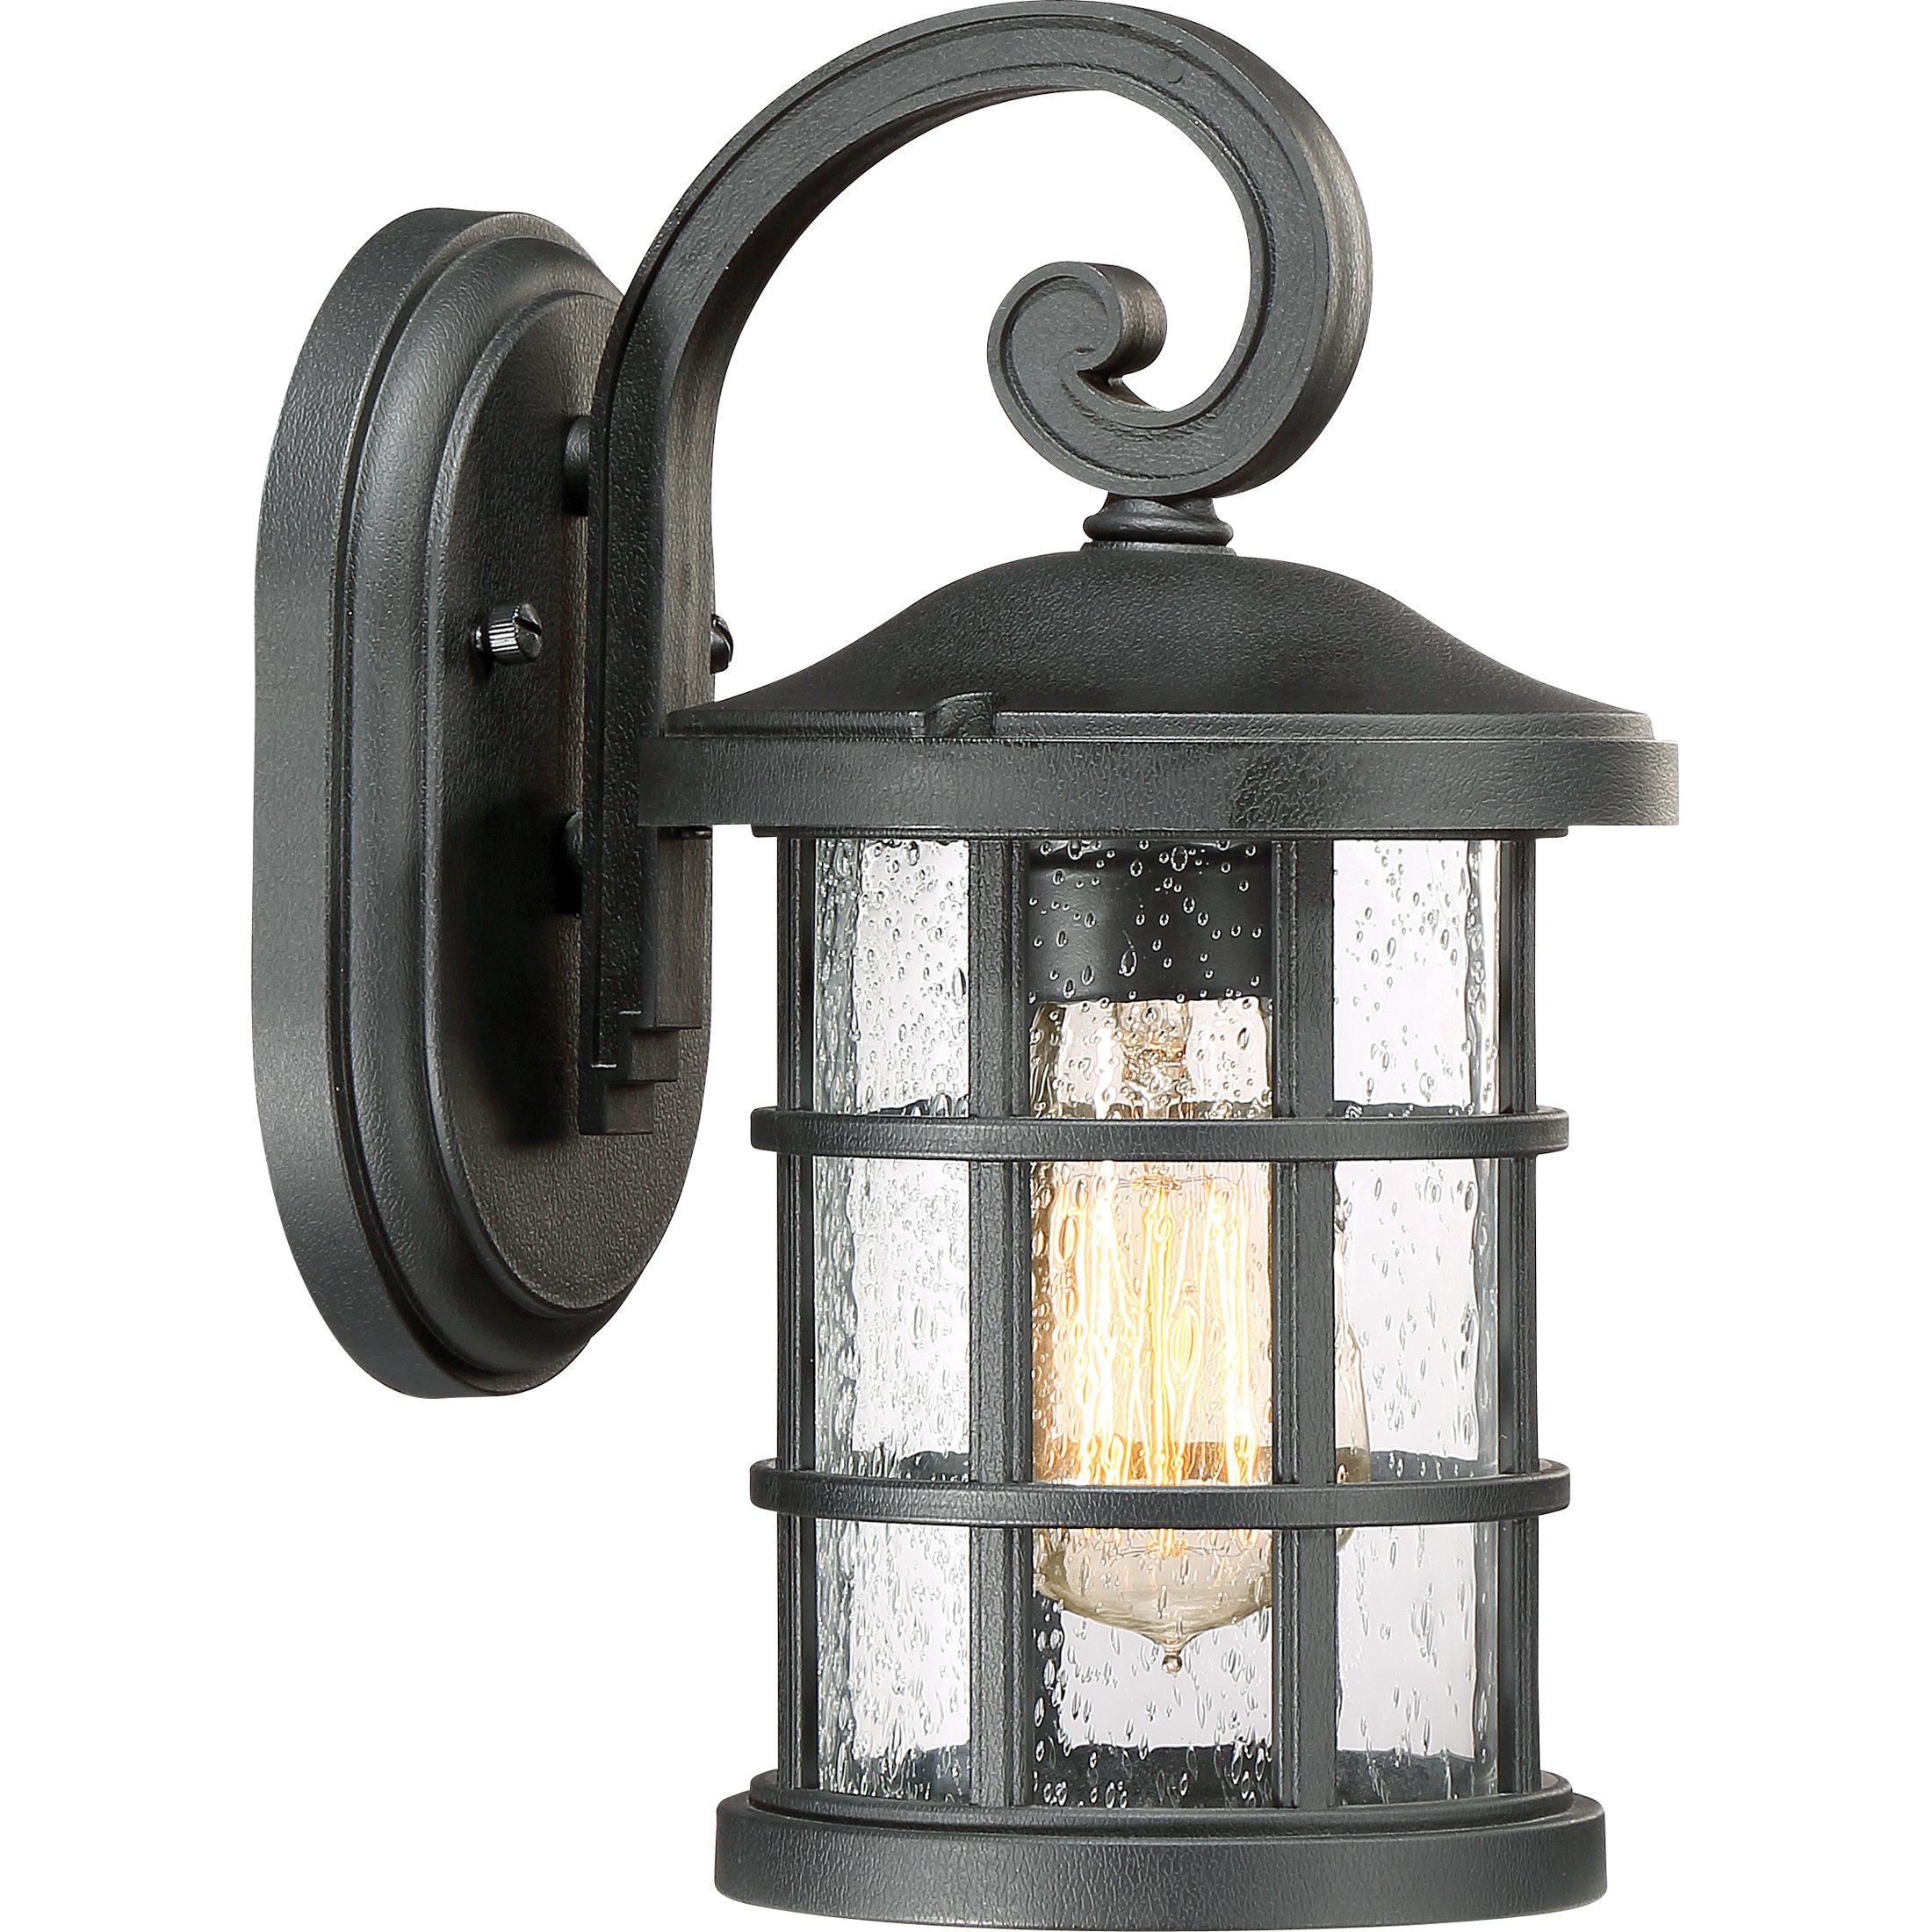 Quoizel  Crusade Outdoor Lantern, Small Outdoor l Wall Quoizel Earth Black  